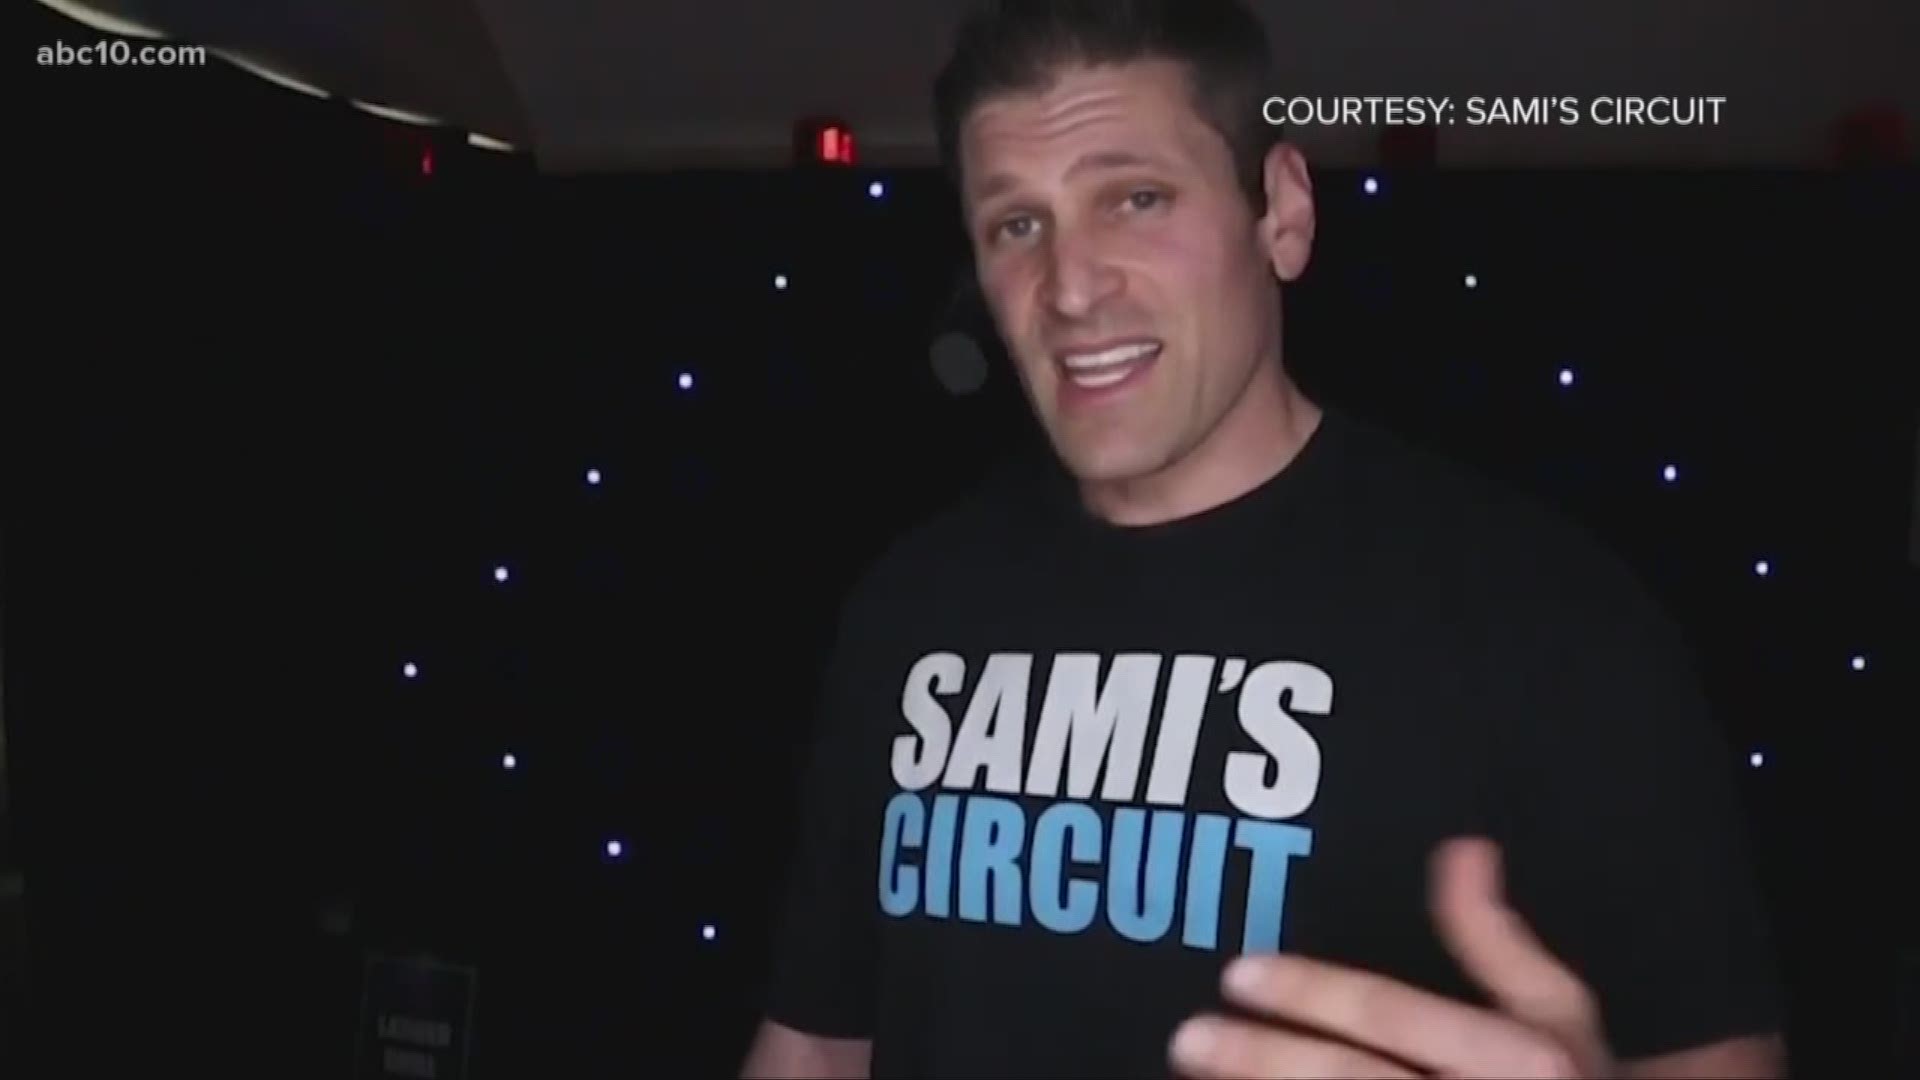 Sami Kader, who produces the fun "Sami's Circuit" motivational workout routine for kids and families, is continuing to provide videos online to lift spirits.